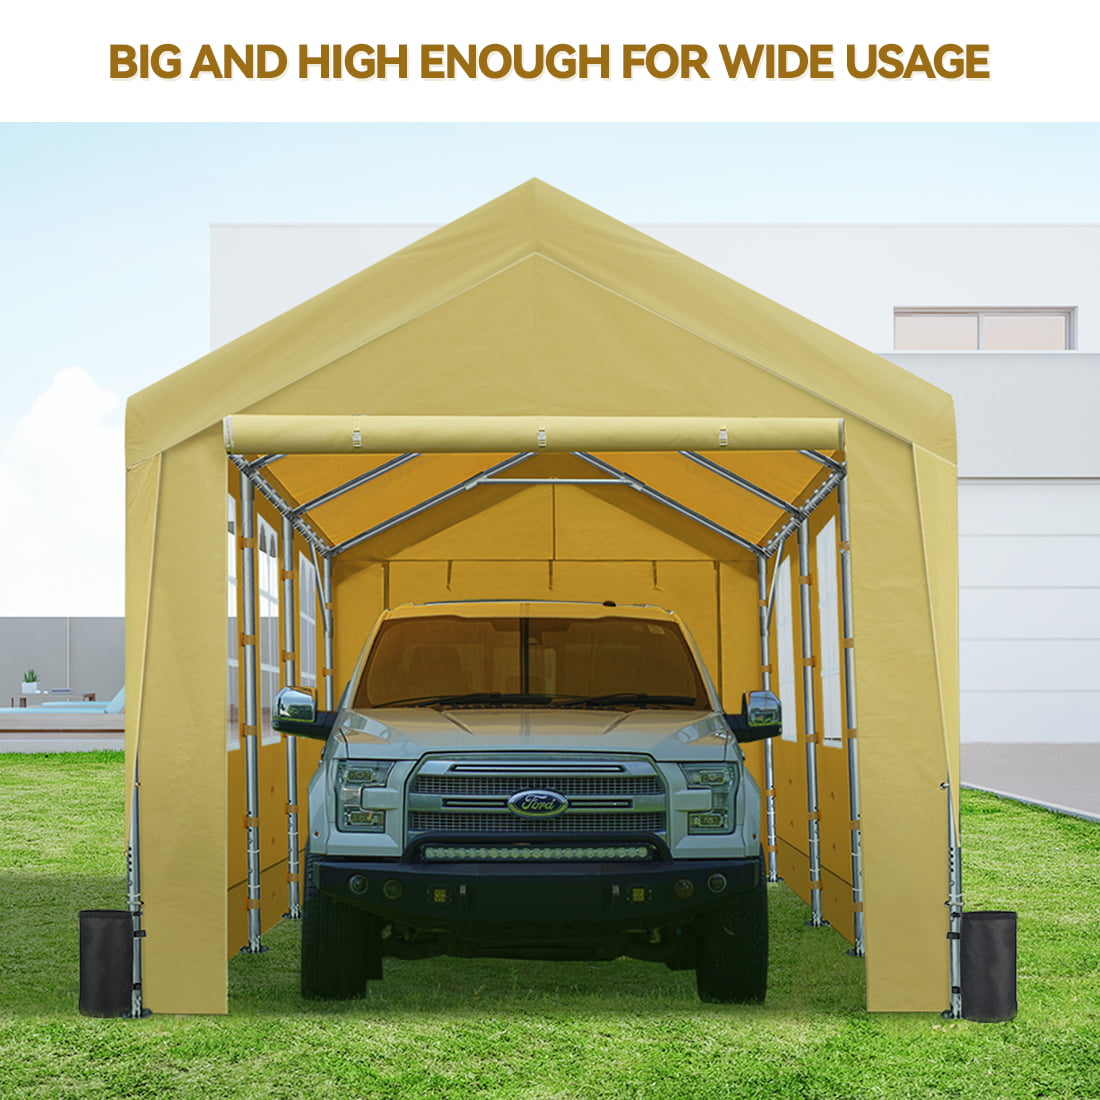 ADVANCE OUTDOOR Upgraded 10'x20' Heavy Duty Steel Carport with Adjustable  Height from 9.5 to 11 ft, Car Canopy Garage Party Tent Storage Shed Boat 